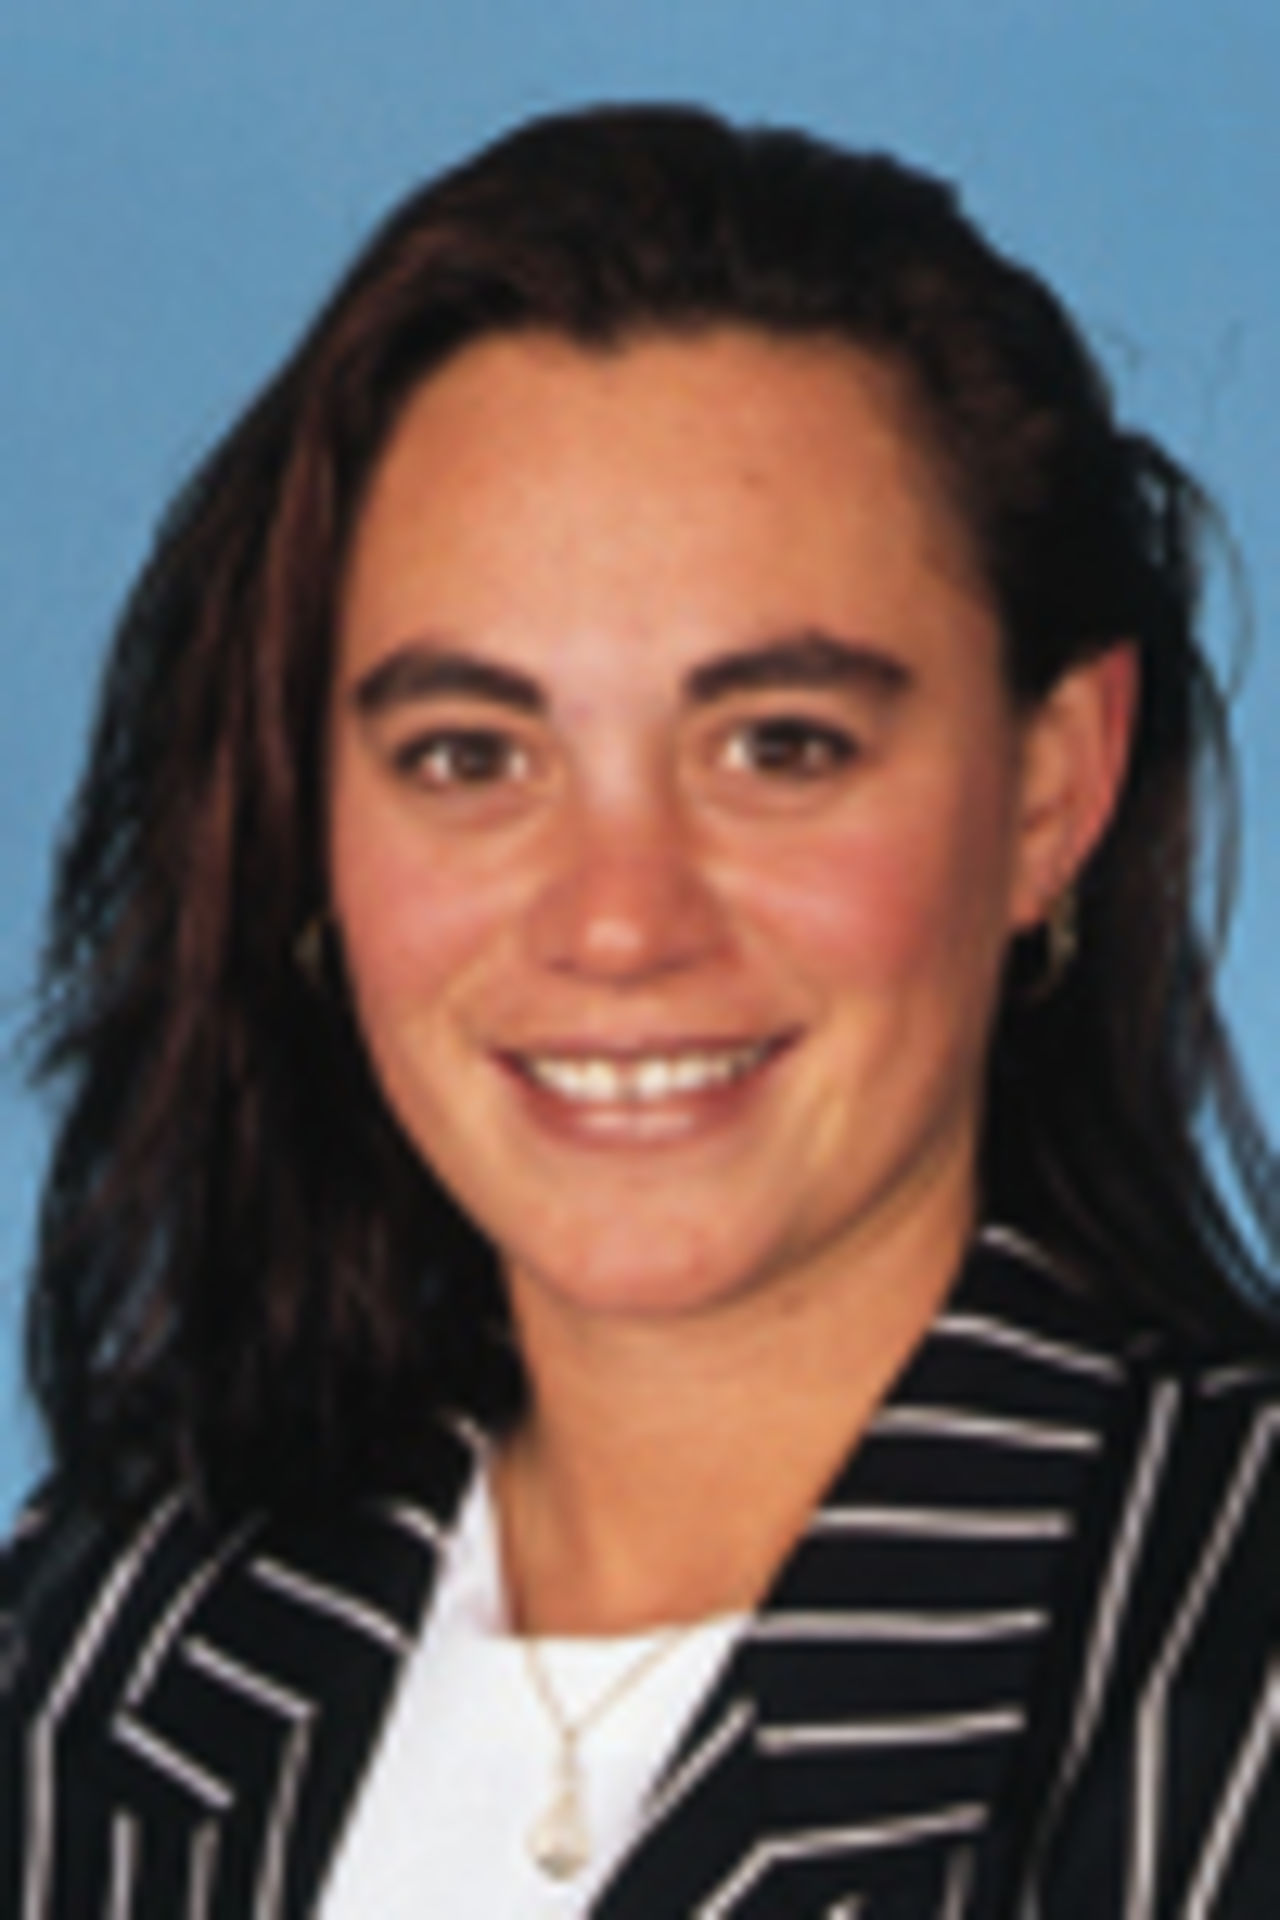 Portrait of Maia Lewis, New Zealand women's player in the 1997/98 season.